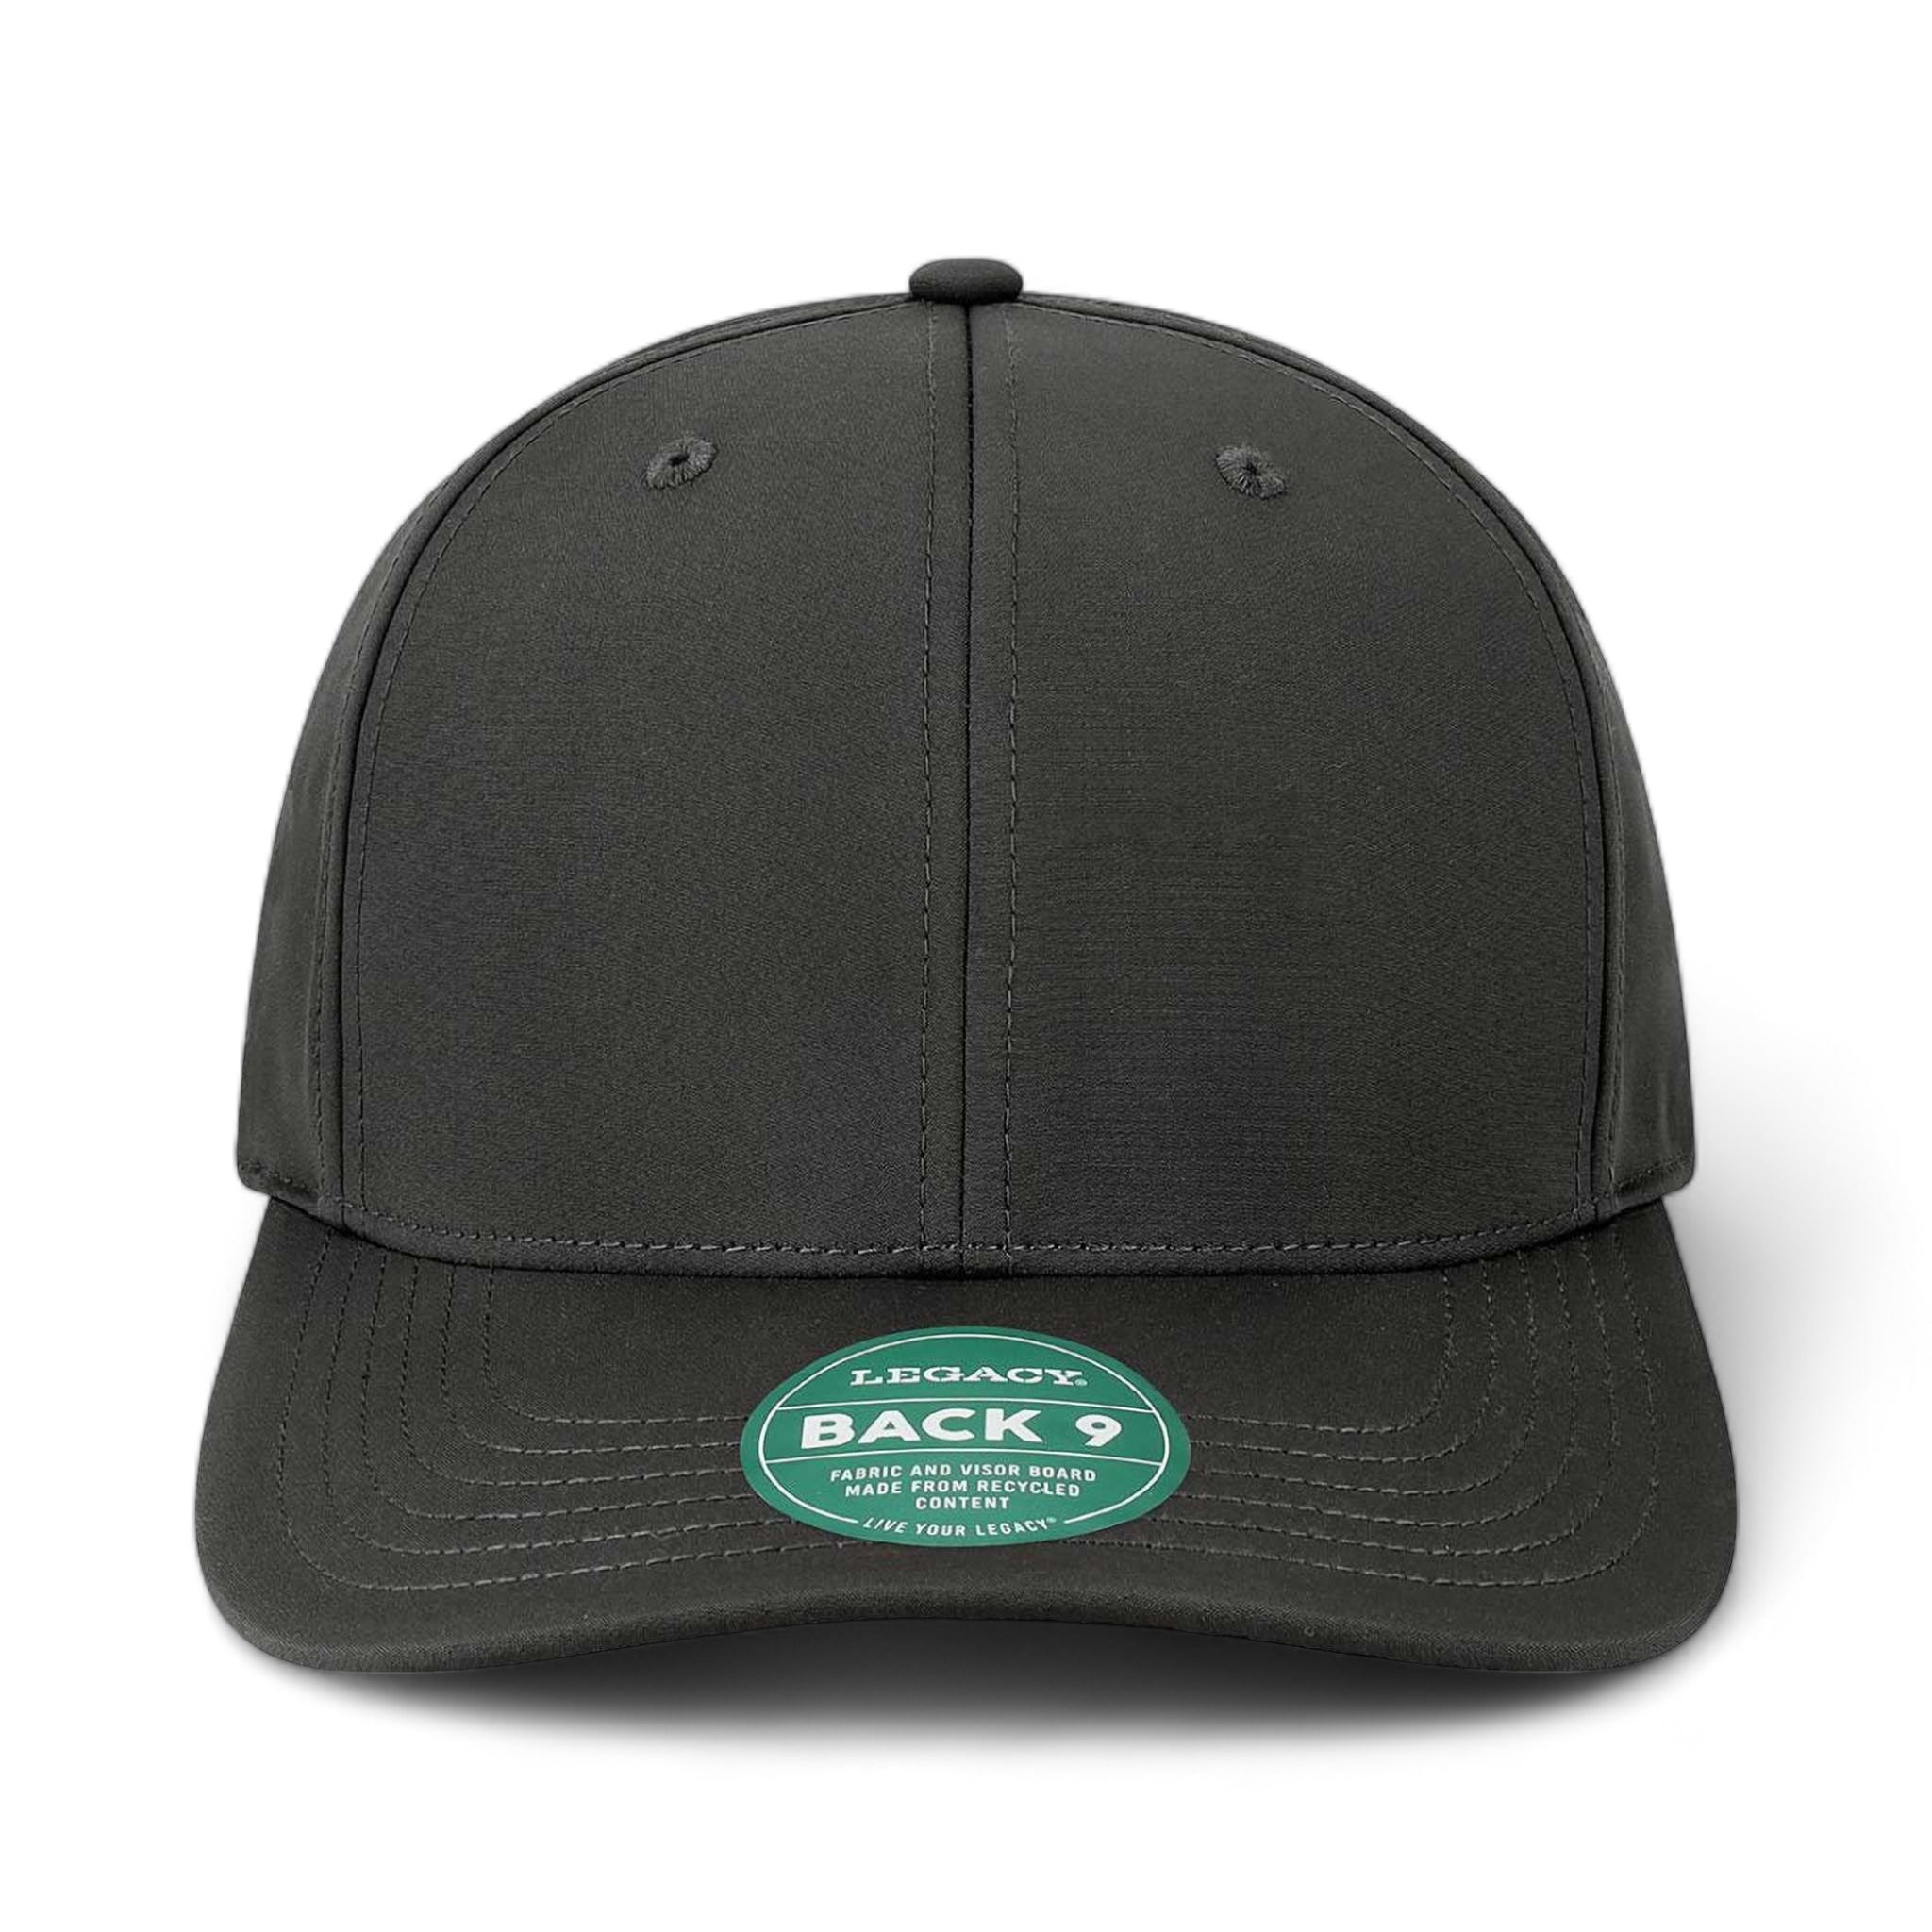 Front view of LEGACY B9A custom hat in black